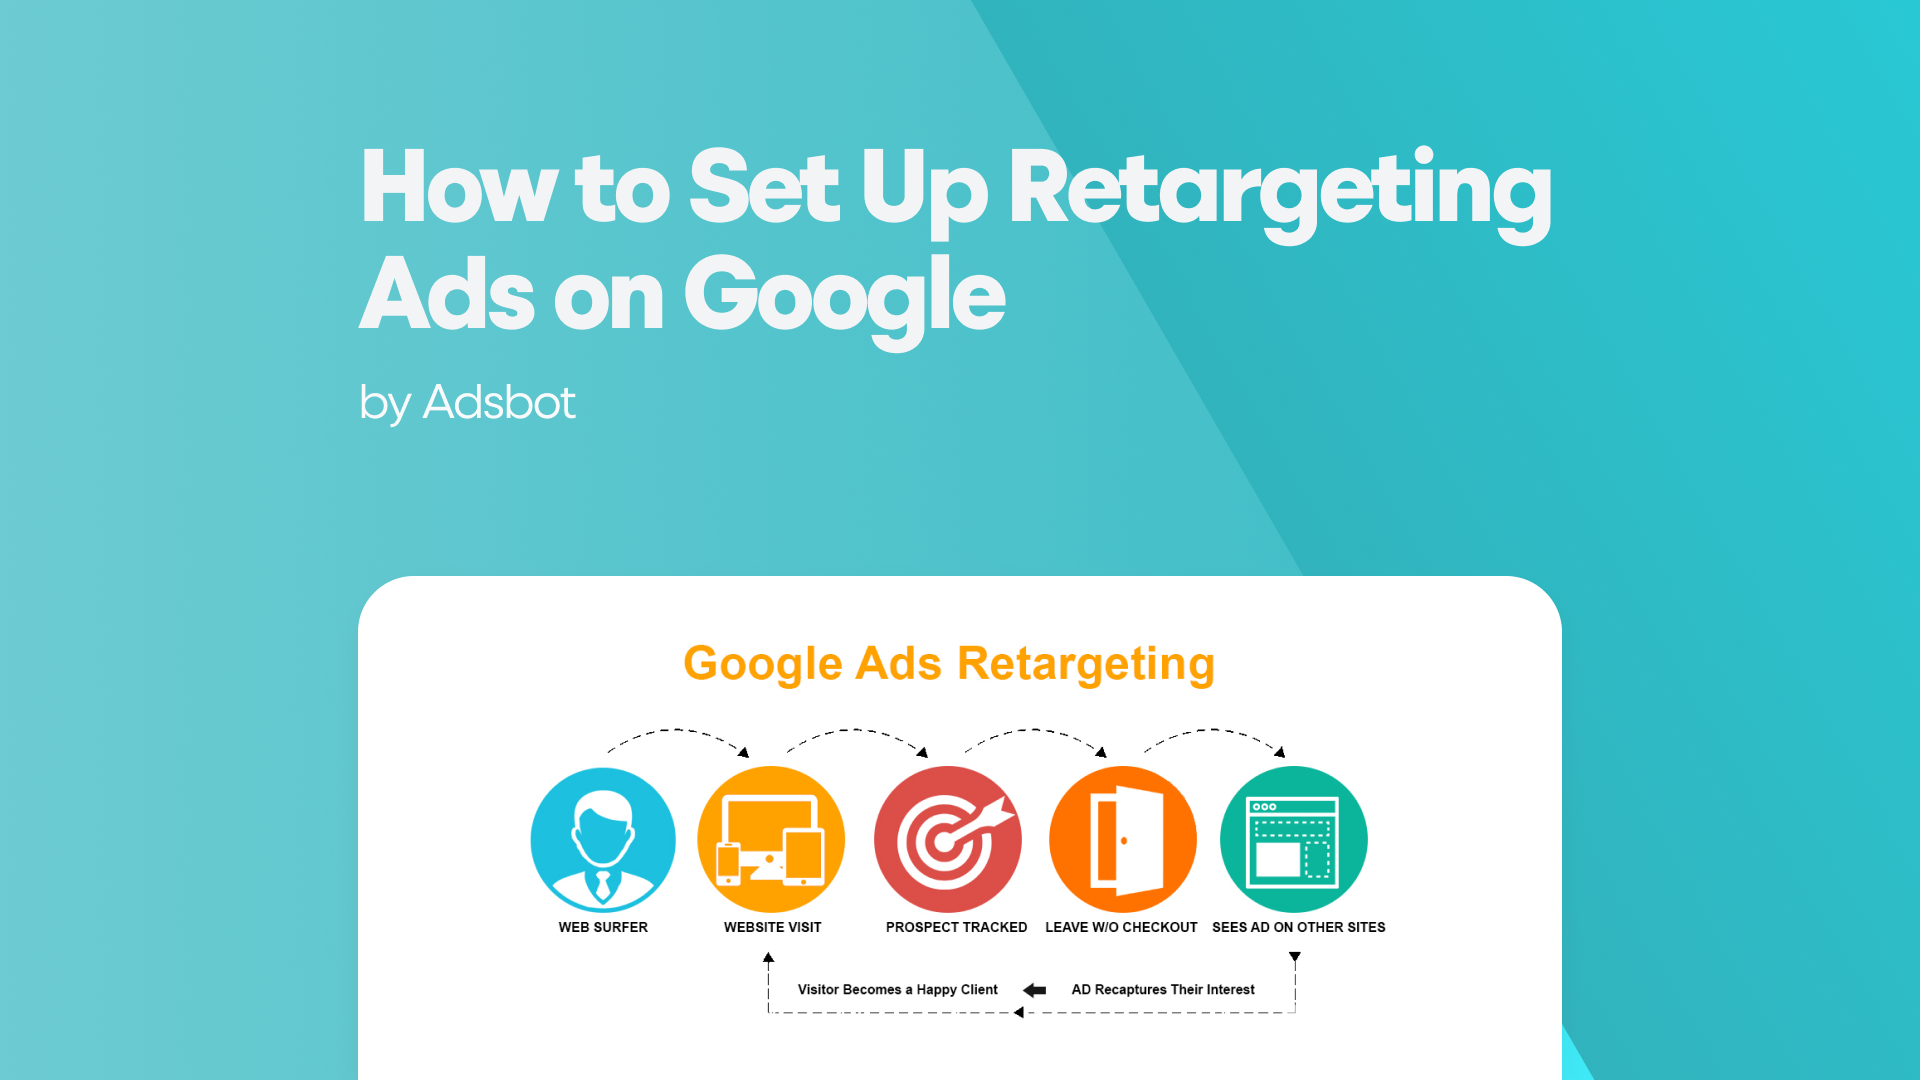 How To Set Up Retargeting Ads on Google